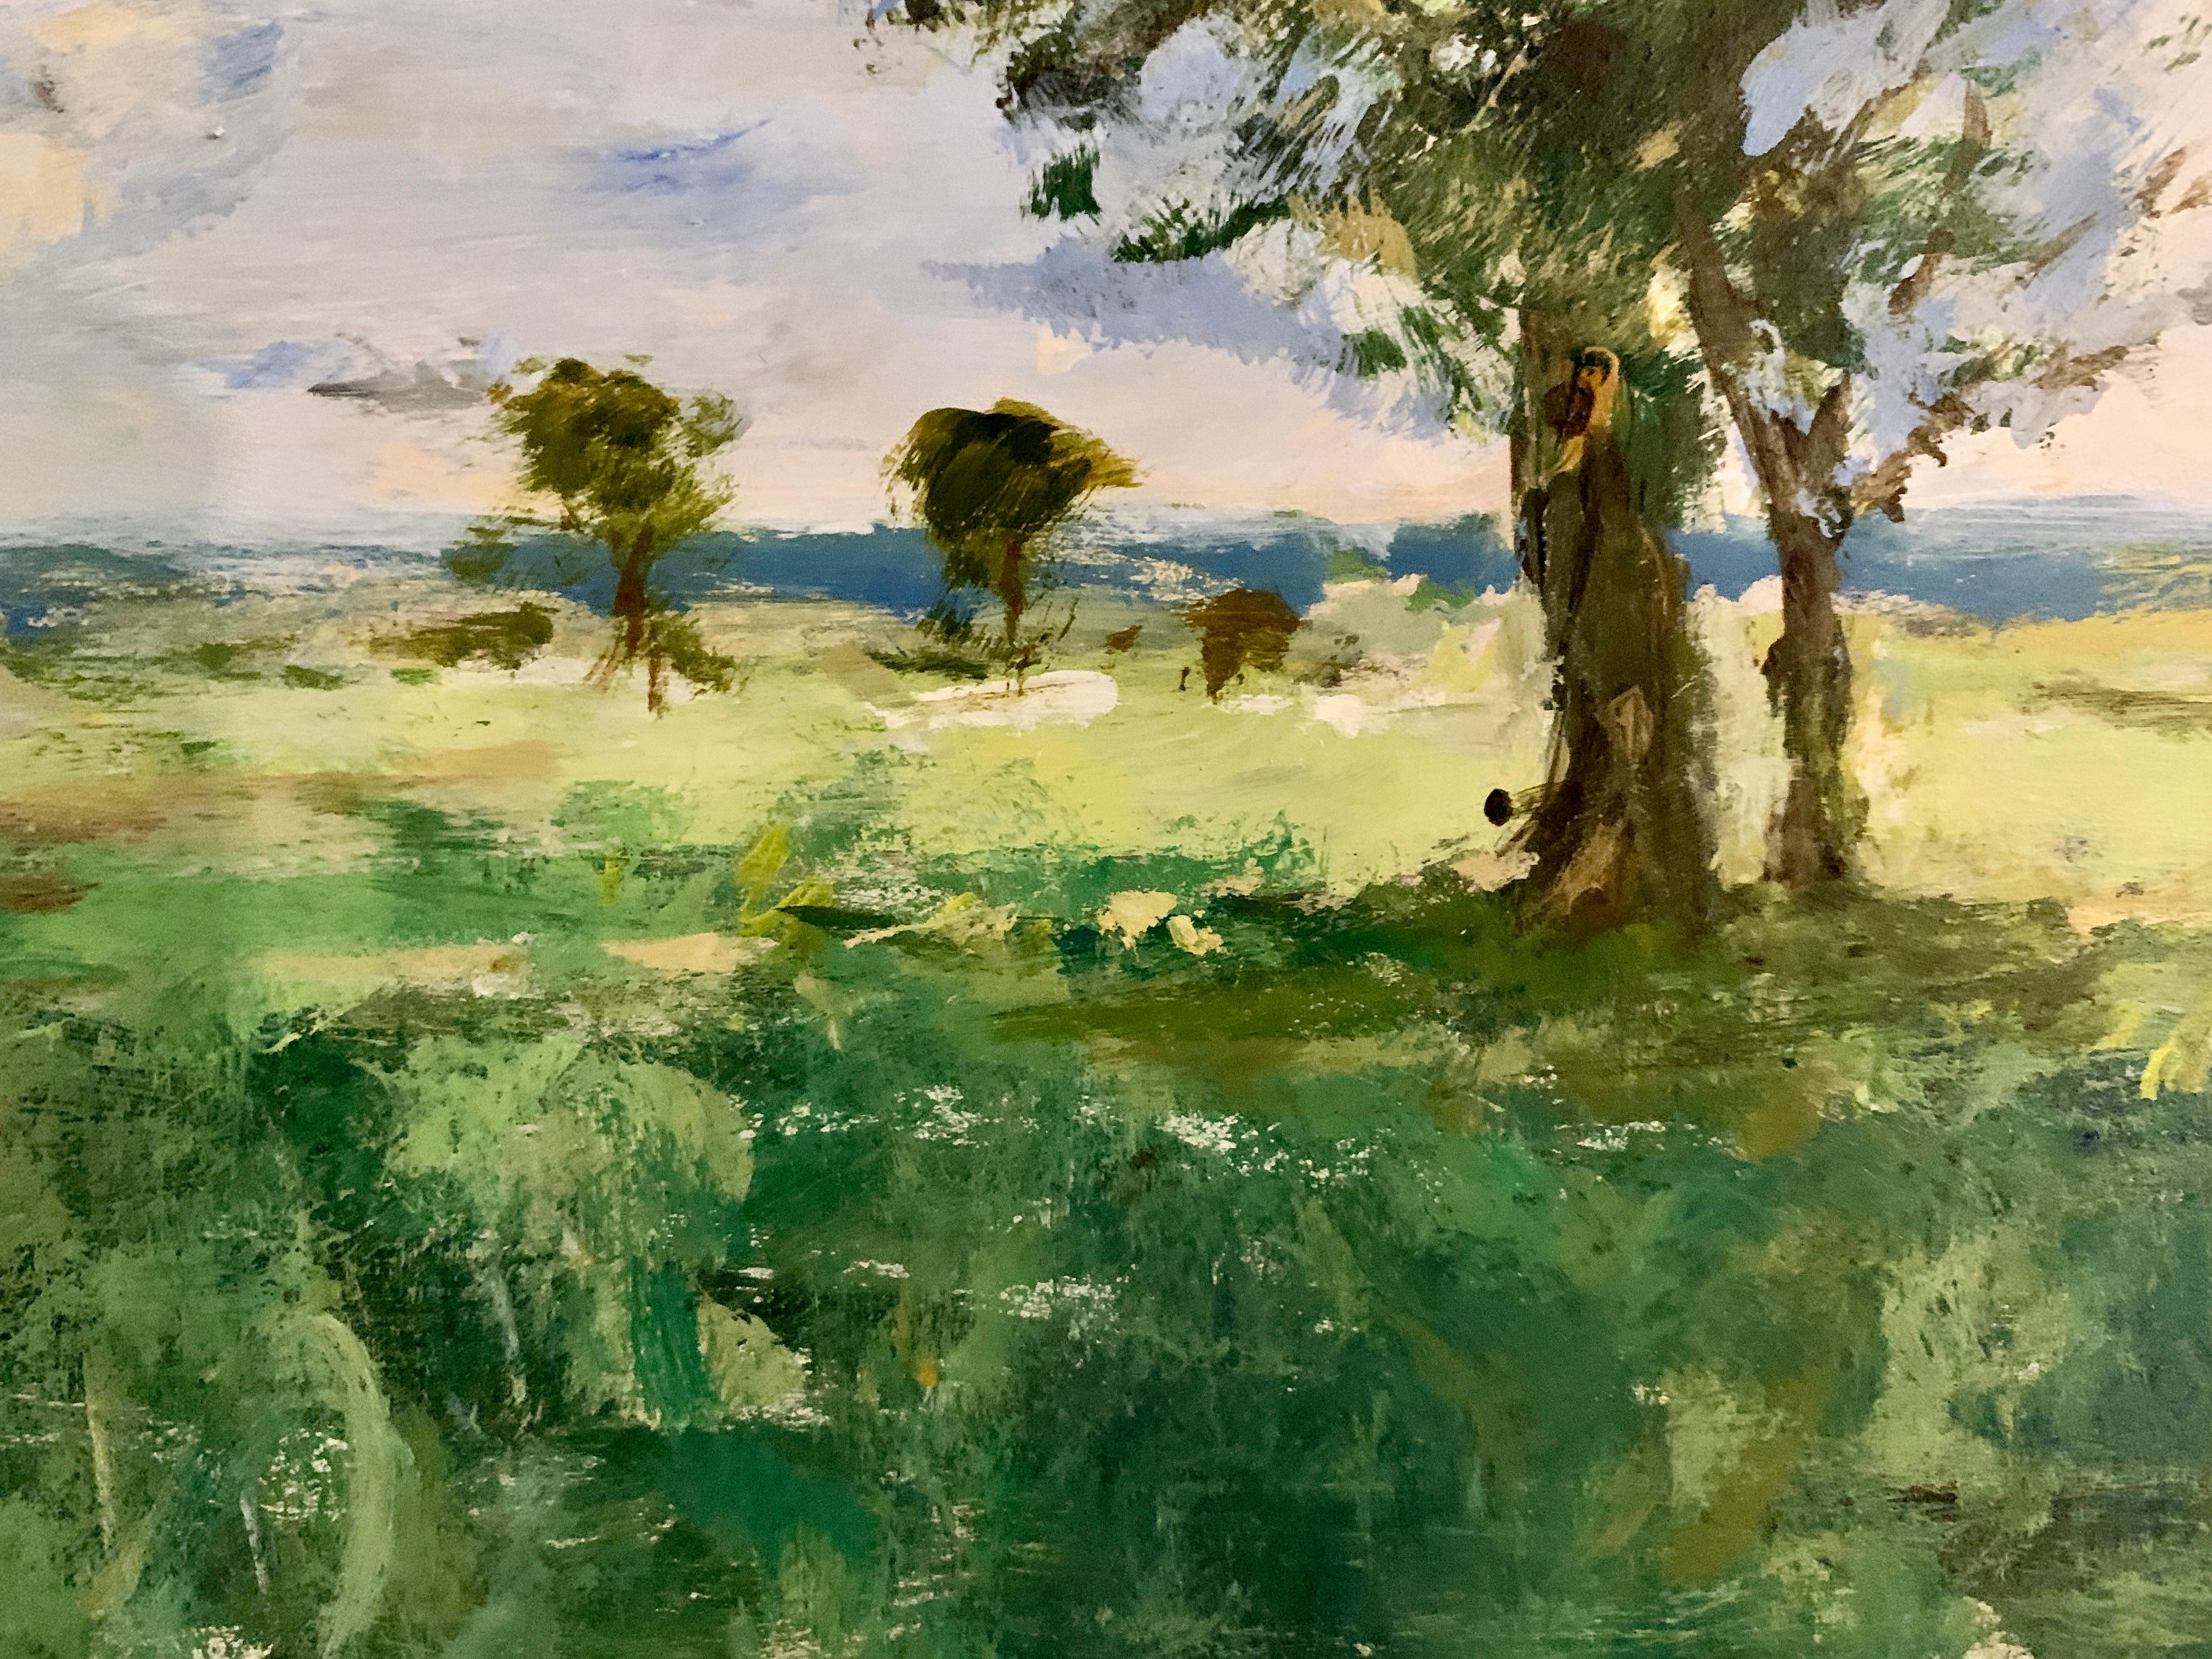 Oil painting, Impressionist Late 20th century landscape with trees, Surrey, UK - Beige Landscape Painting by Charles Bertie Hall